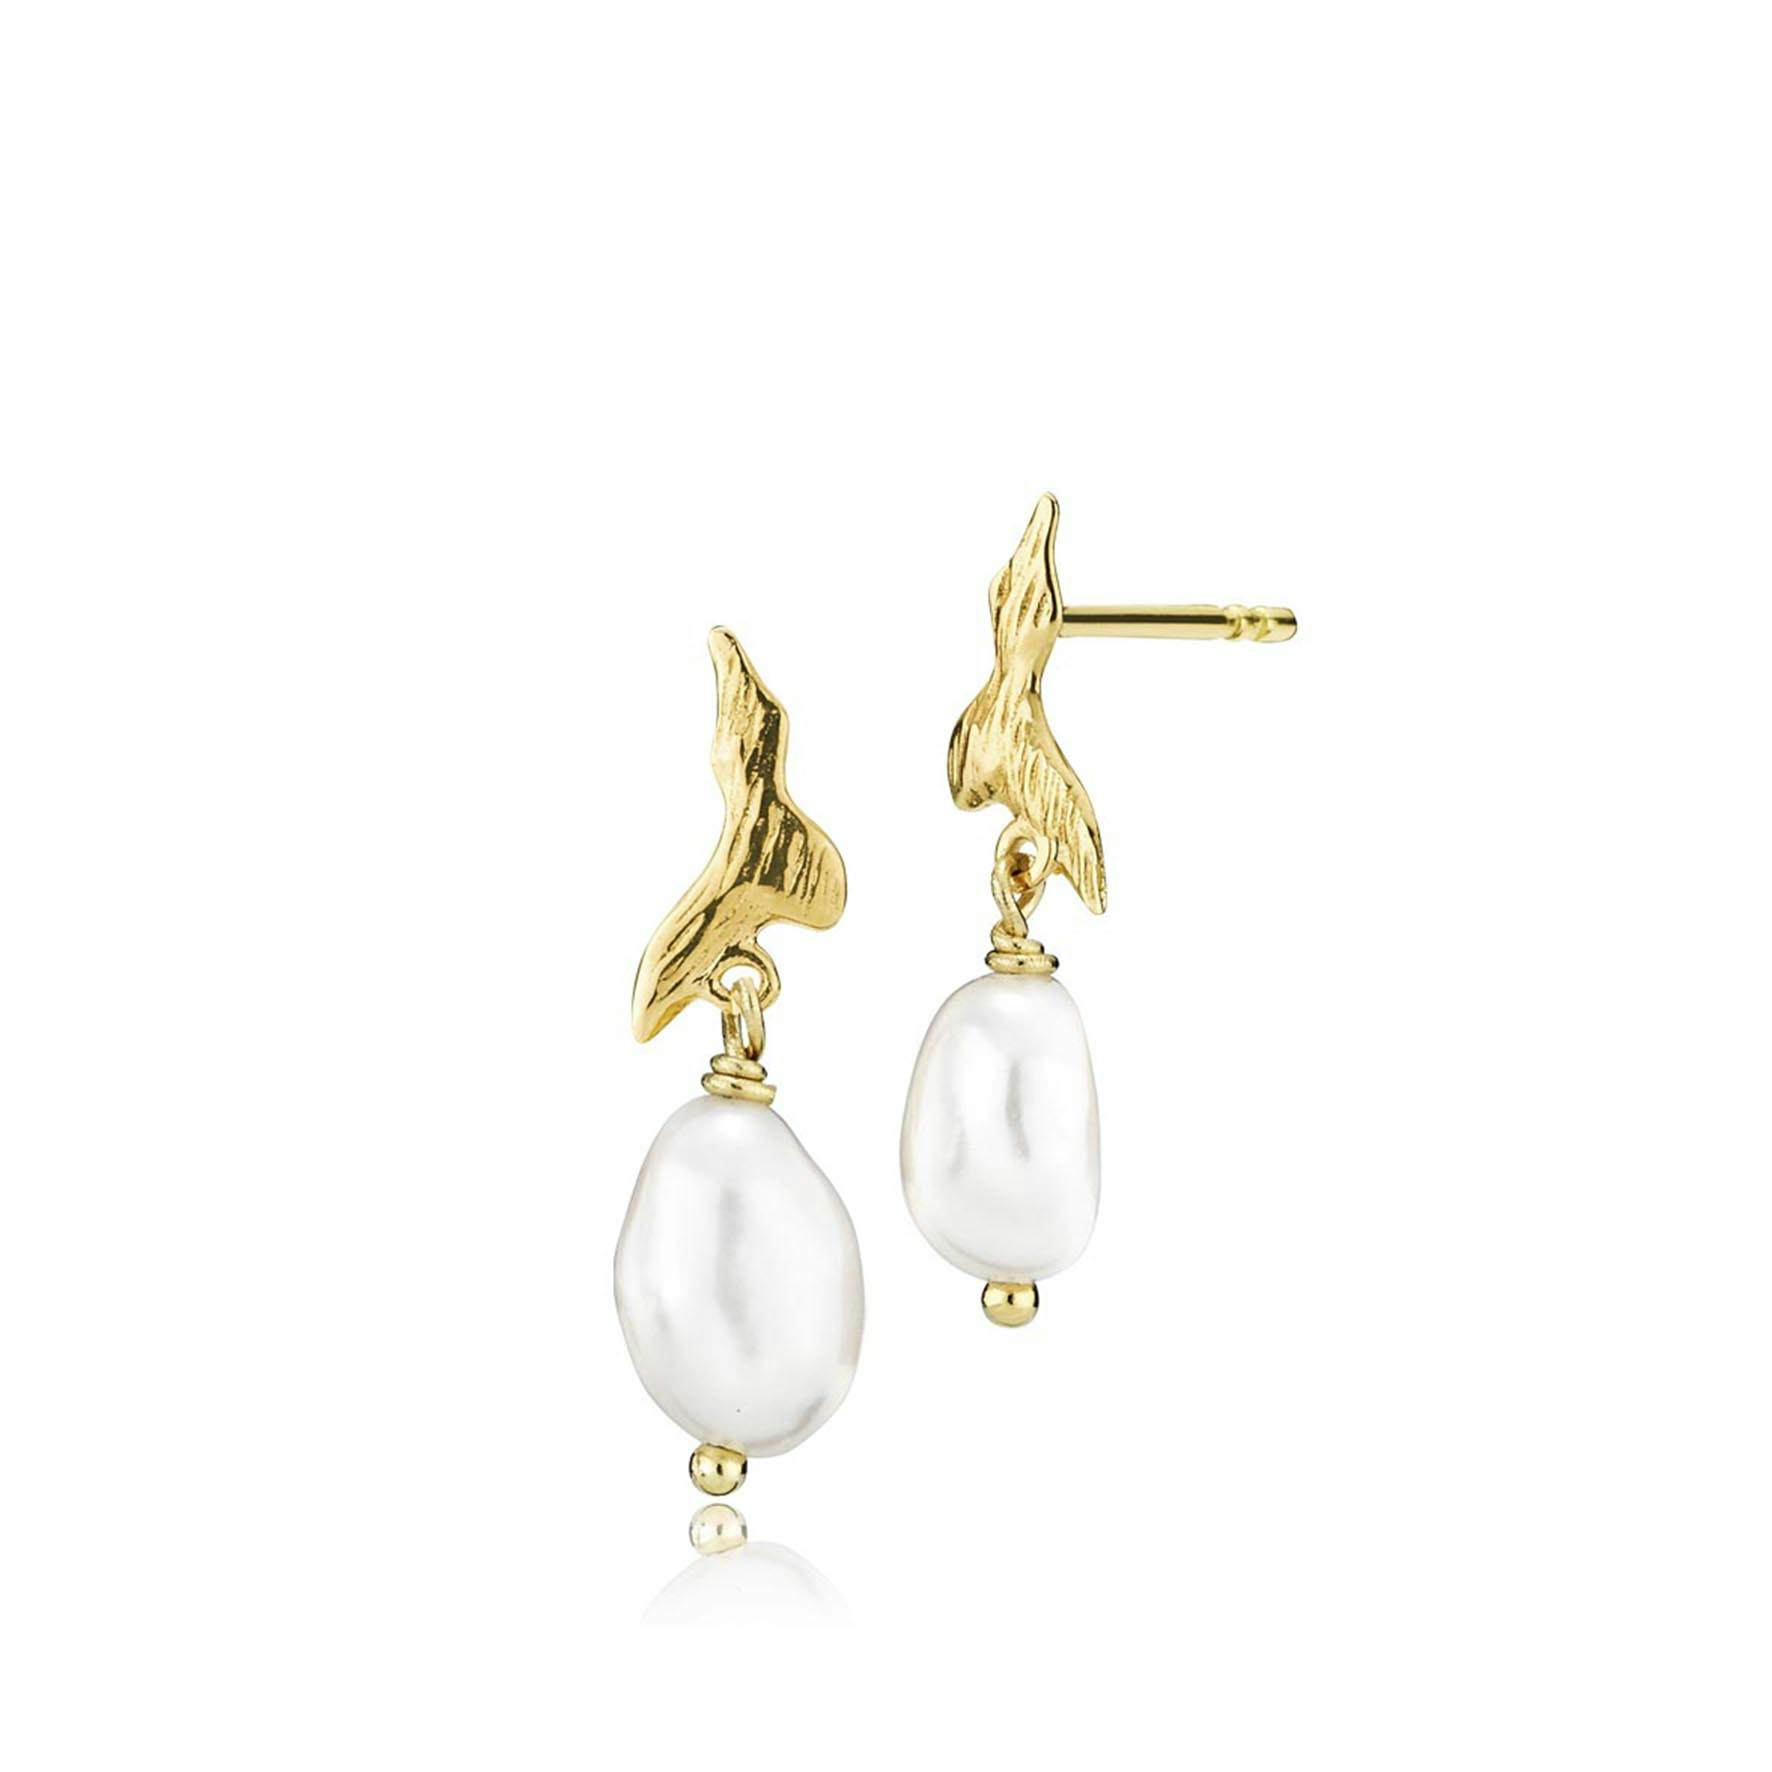 Fairy Earrings With Pearl von Izabel Camille in Vergoldet-Silber Sterling 925|Freshwater Pearl